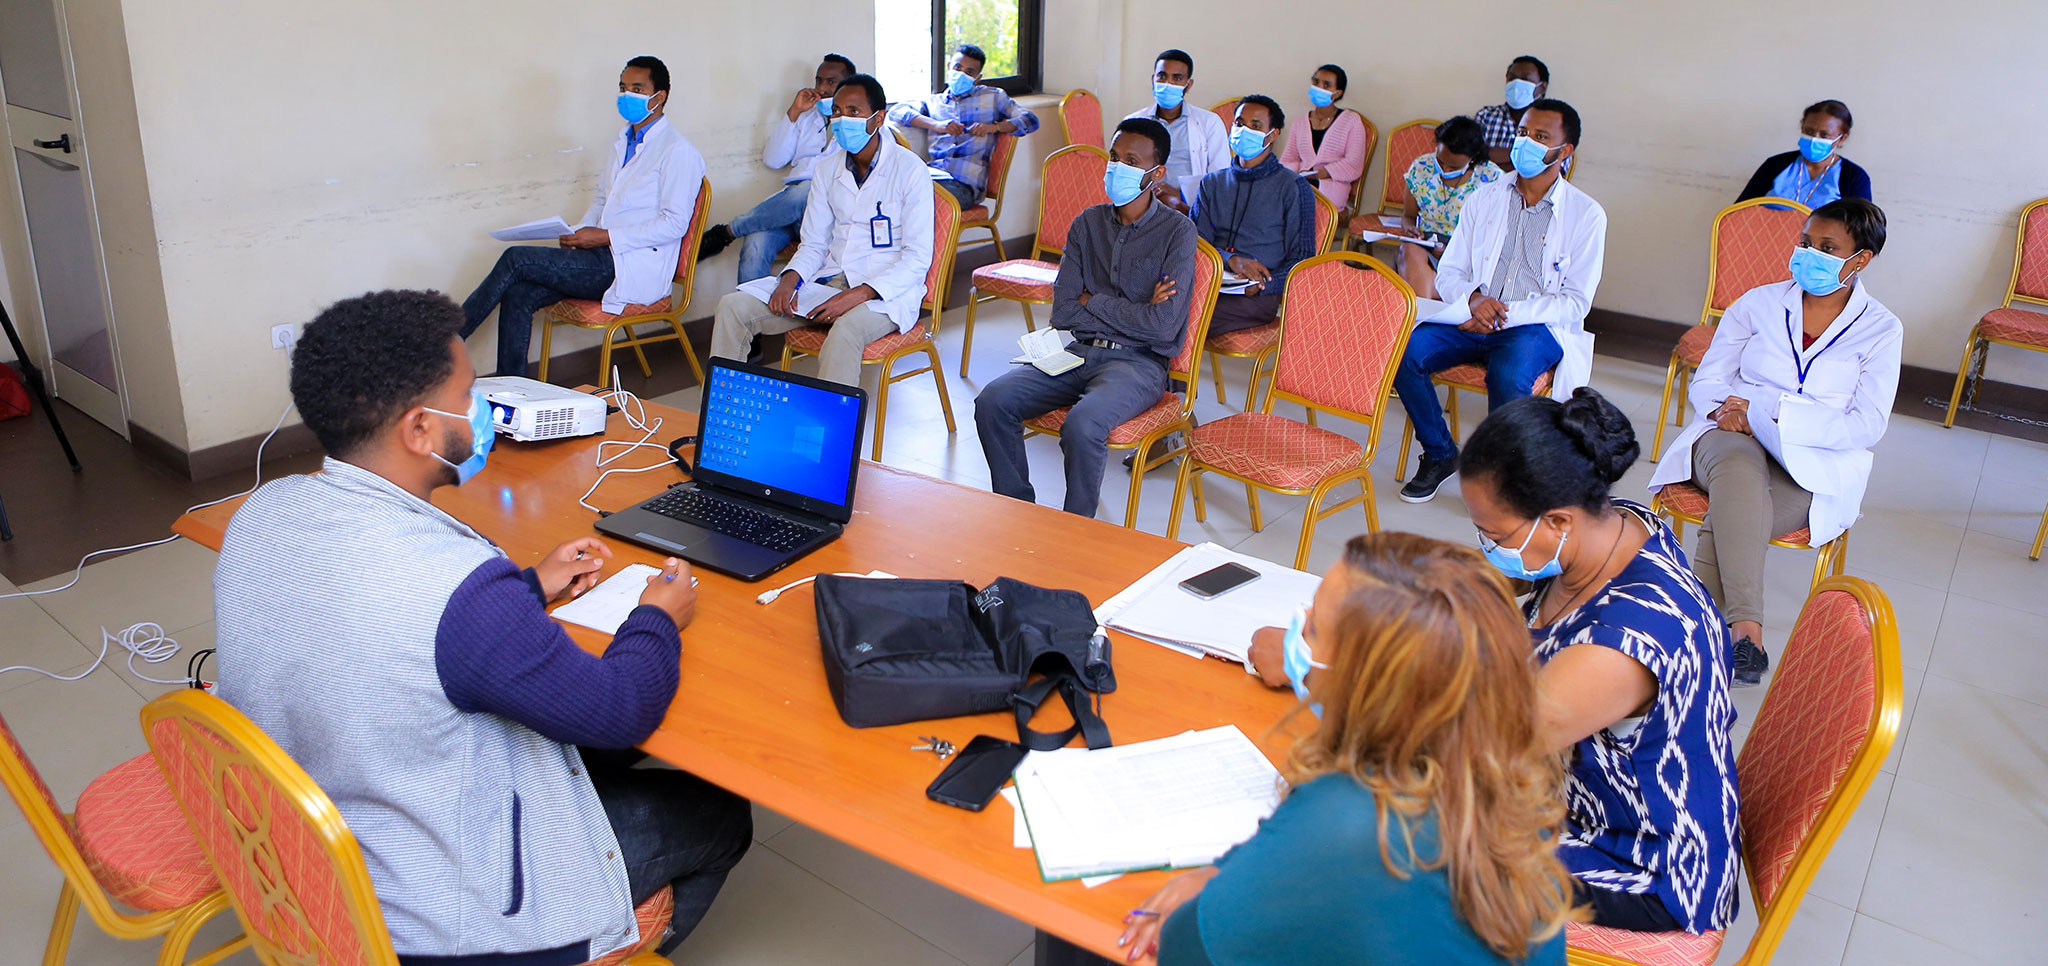 Photo of several people in white coats and medical masks attending a meeting